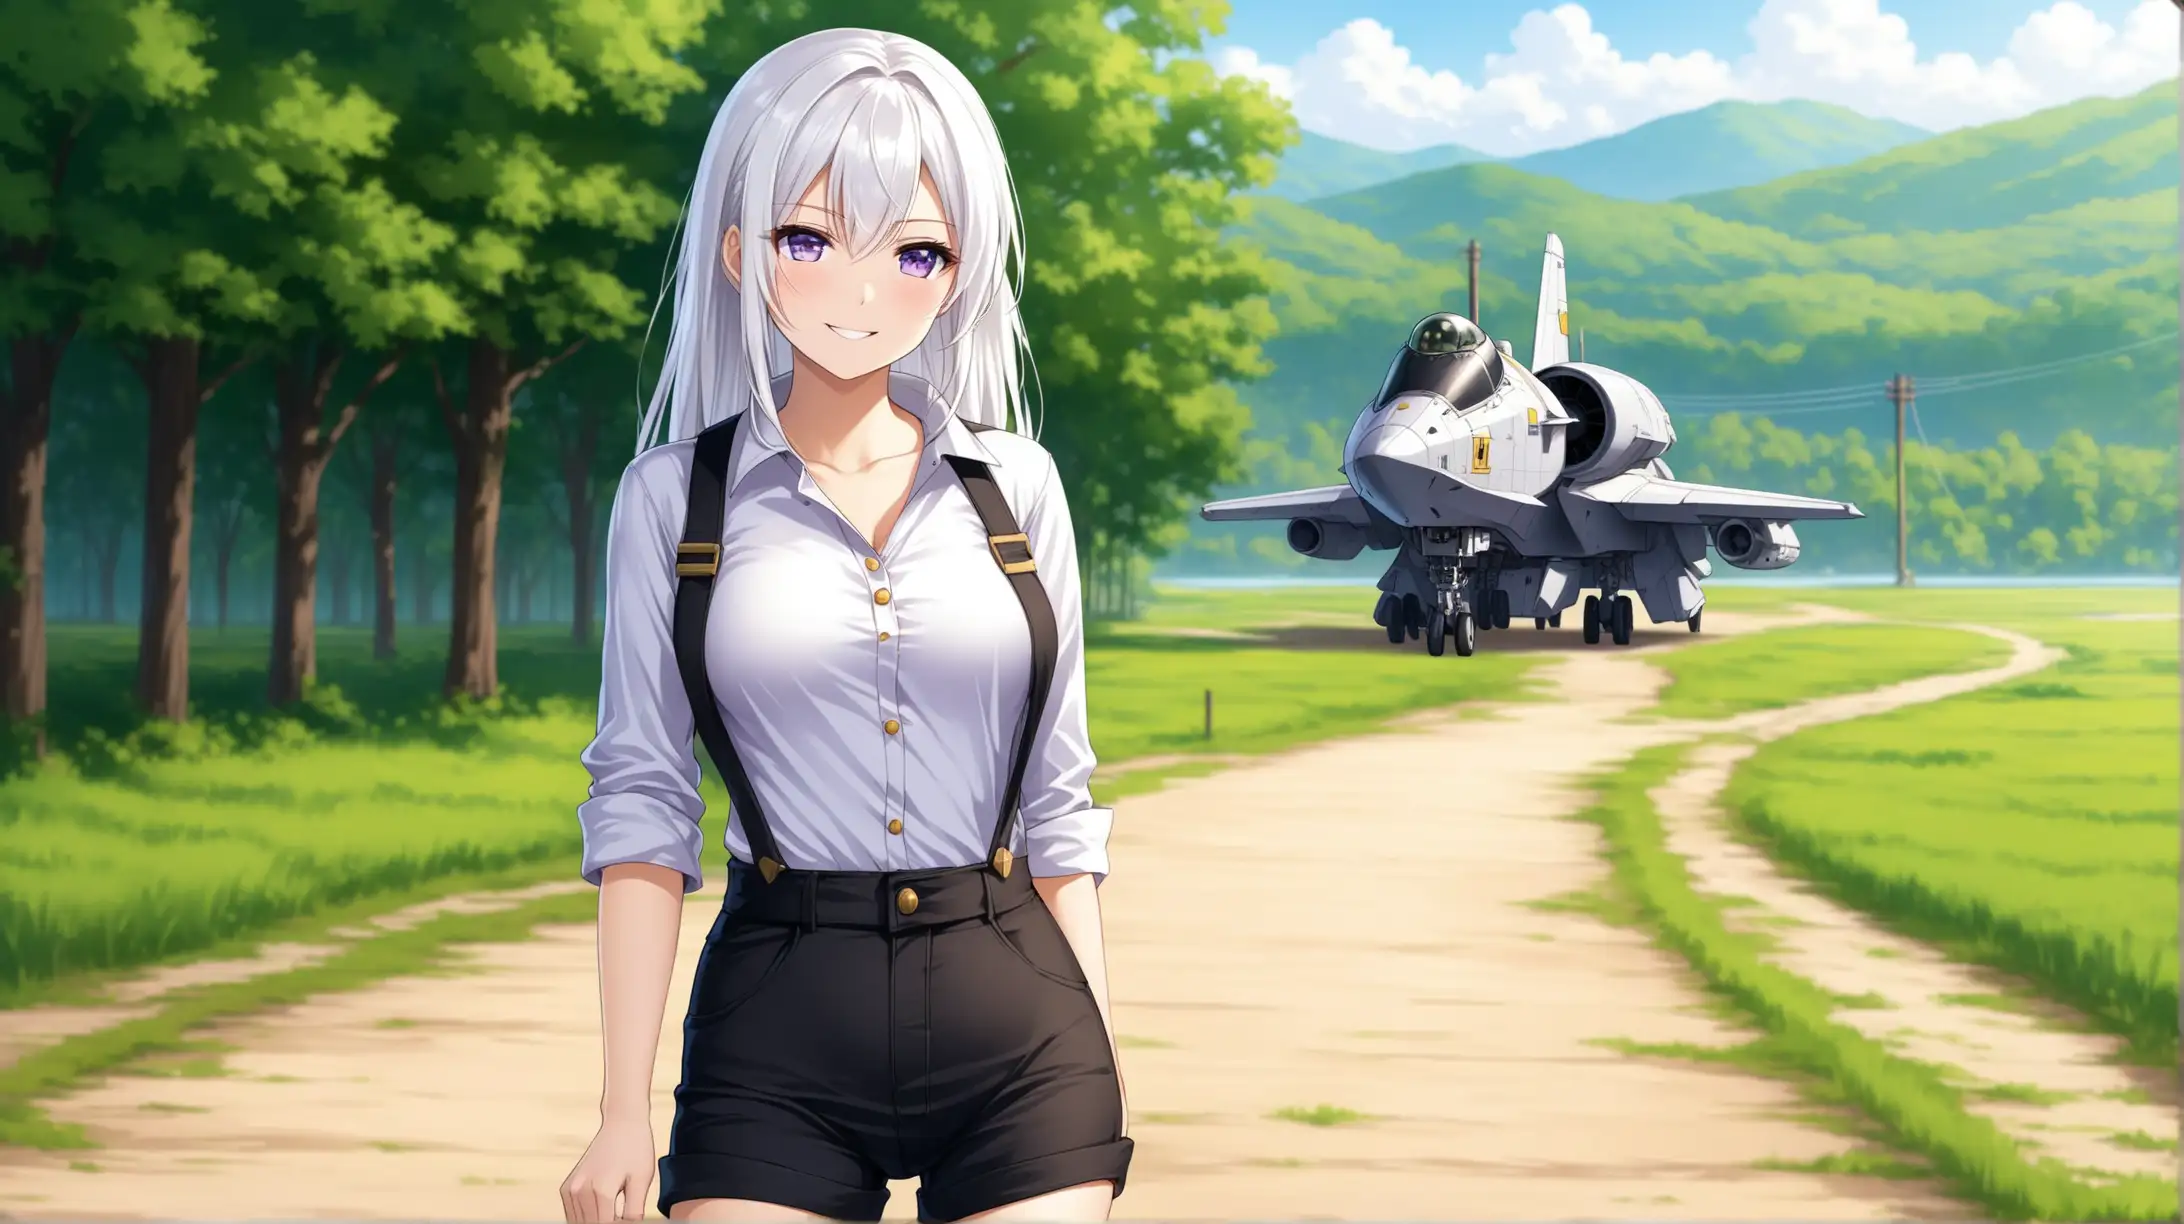 Draw the character Enterprise from Azur Lane, pale violet eyes, white hair, high quality, natural lighting, long shot, outdoors, casual pose, outfit inspired from the Fallout series, rural setting, smiling at the viewer